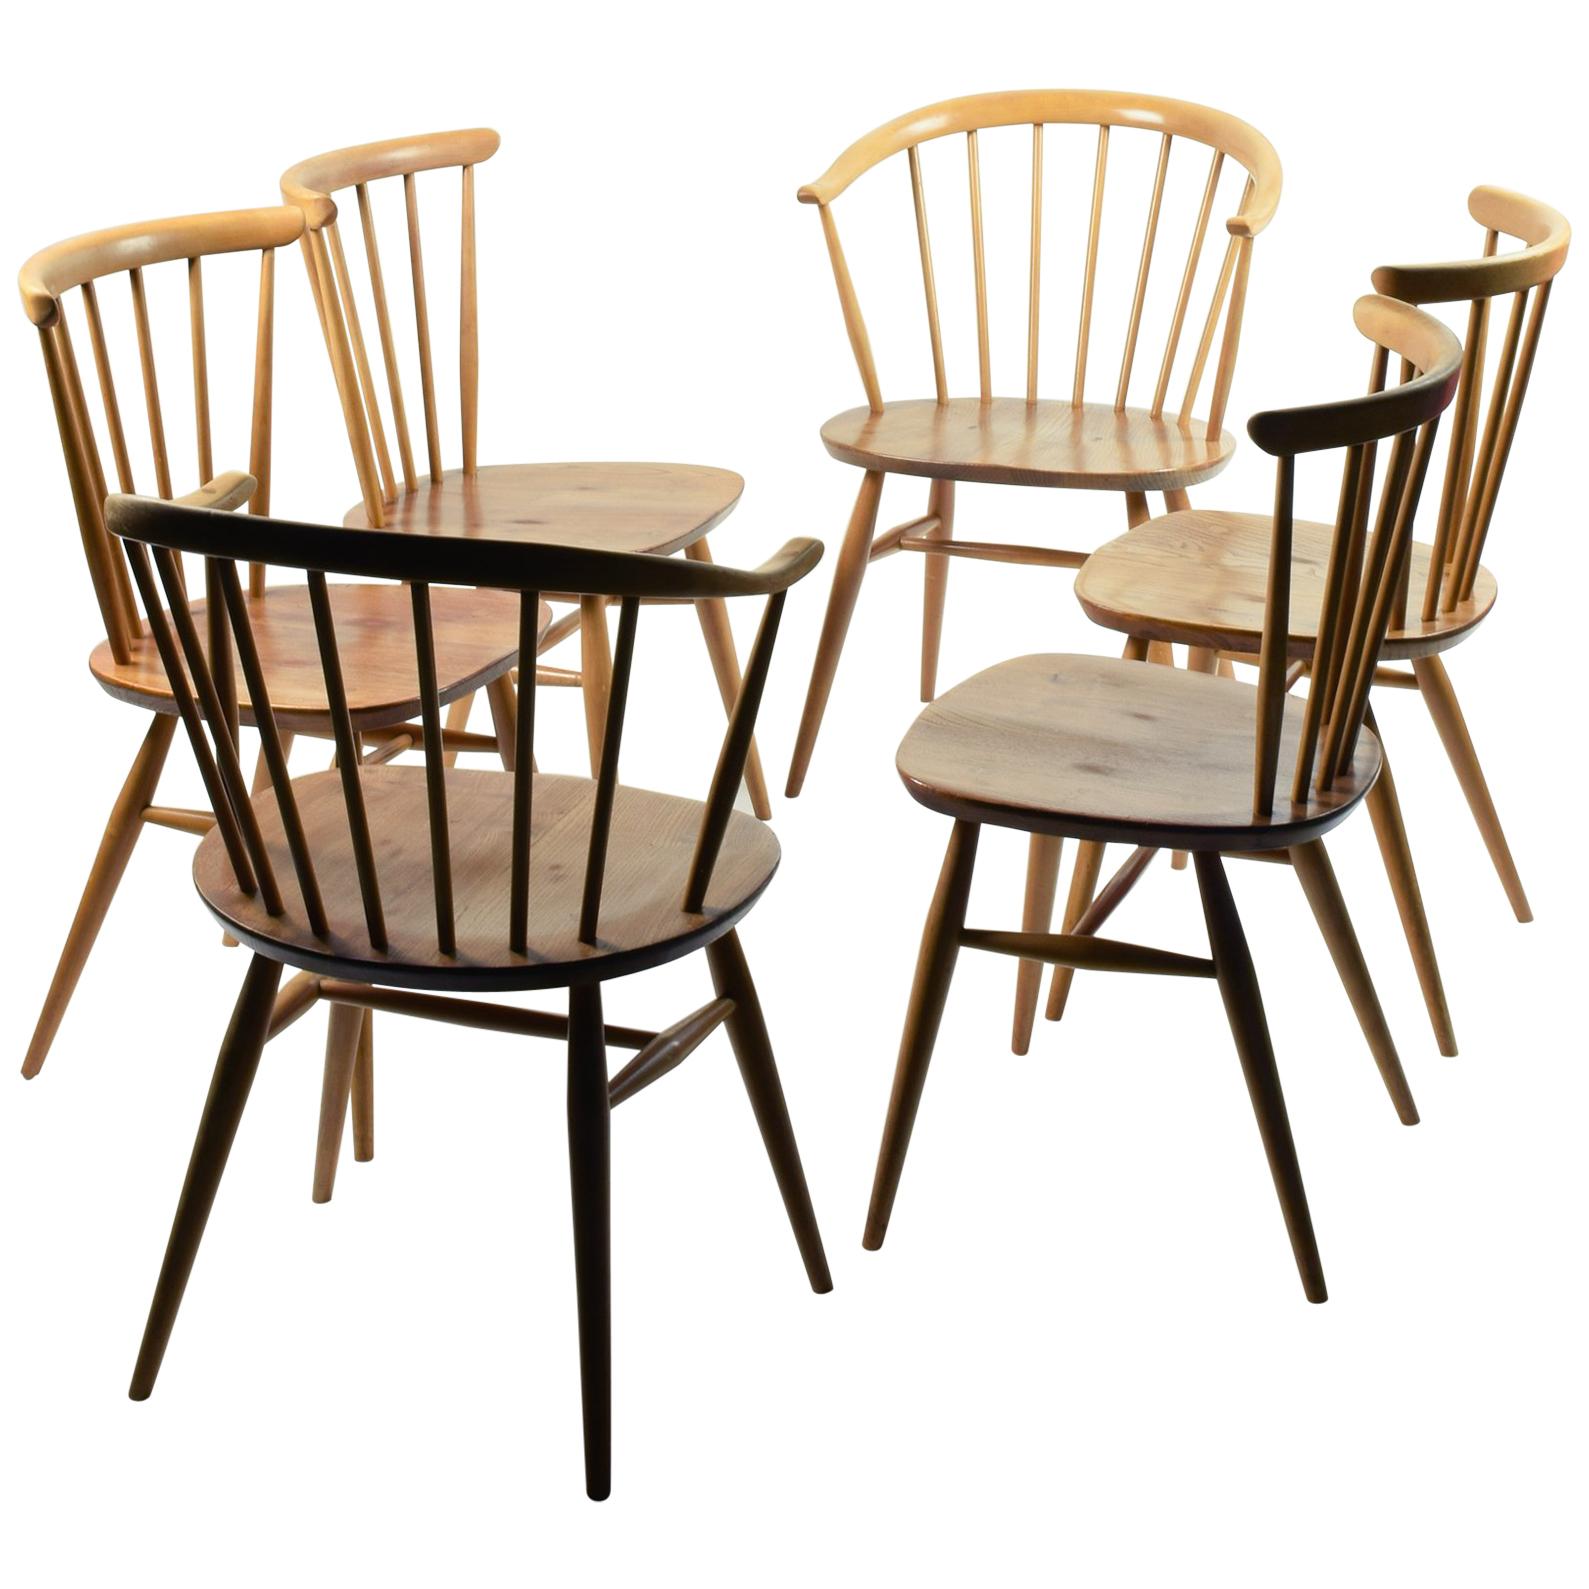 Ercol 'Windsor' Dining Chair set of six, Model 449 and 449A 'Cowhorn'